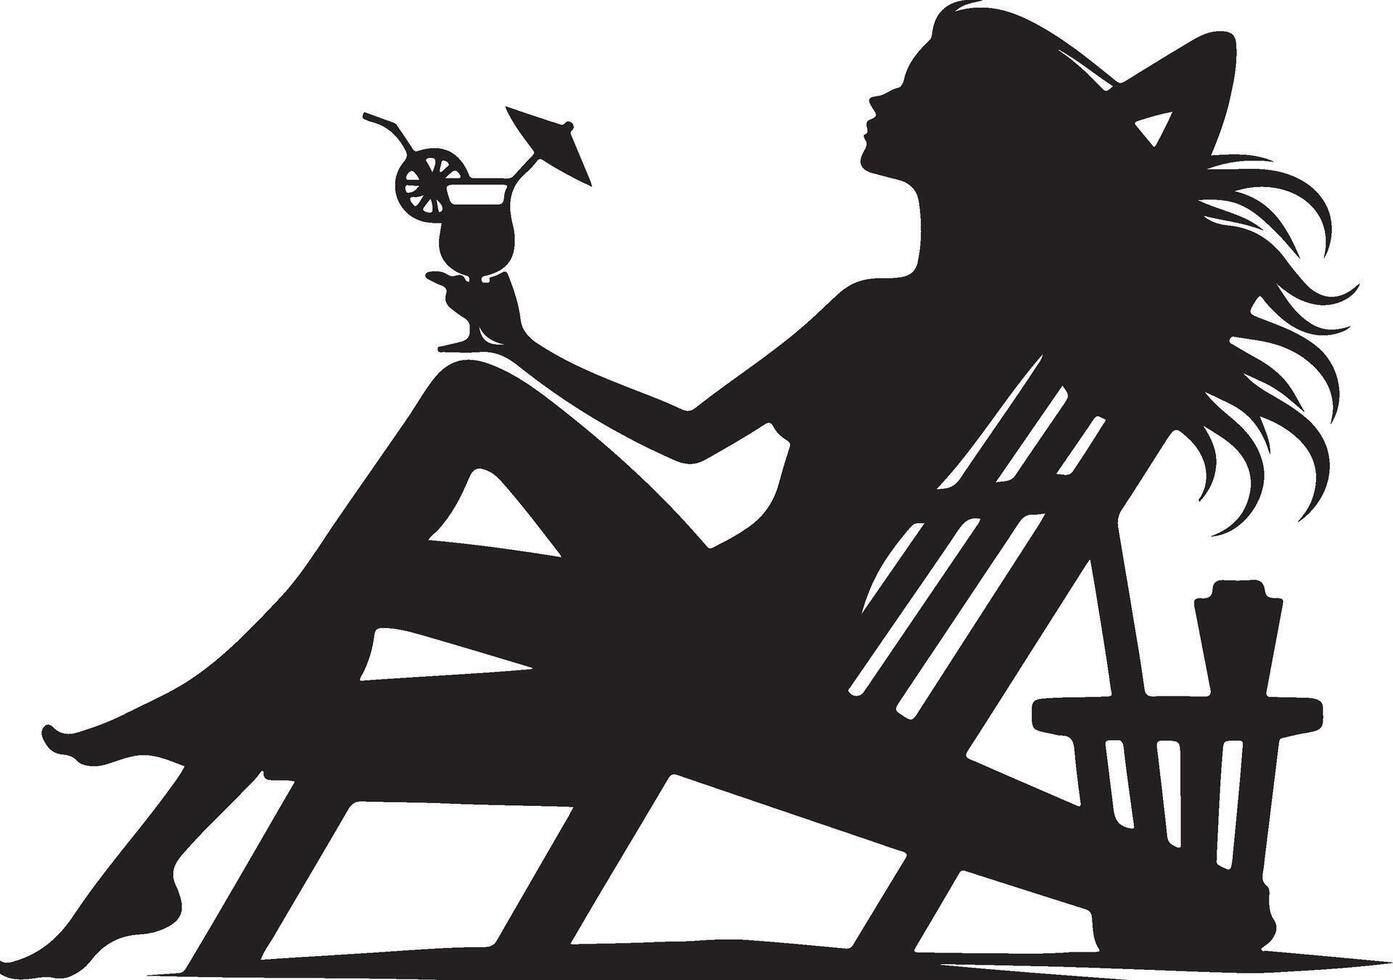 A Woman Relaxing on a Beach Chair with Drink, black color silhouette vector